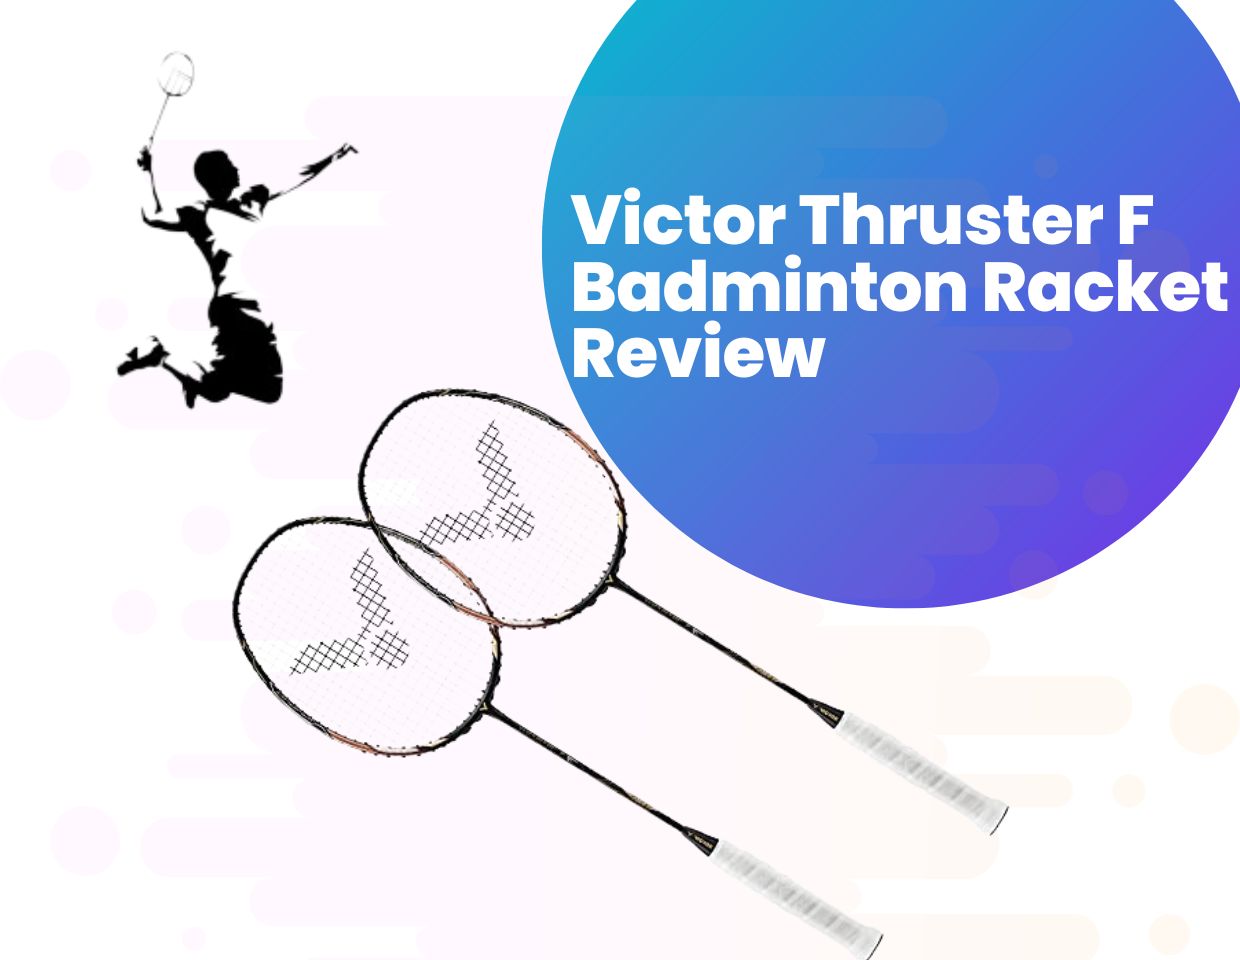 Victor Thruster F Badminton Racket Review